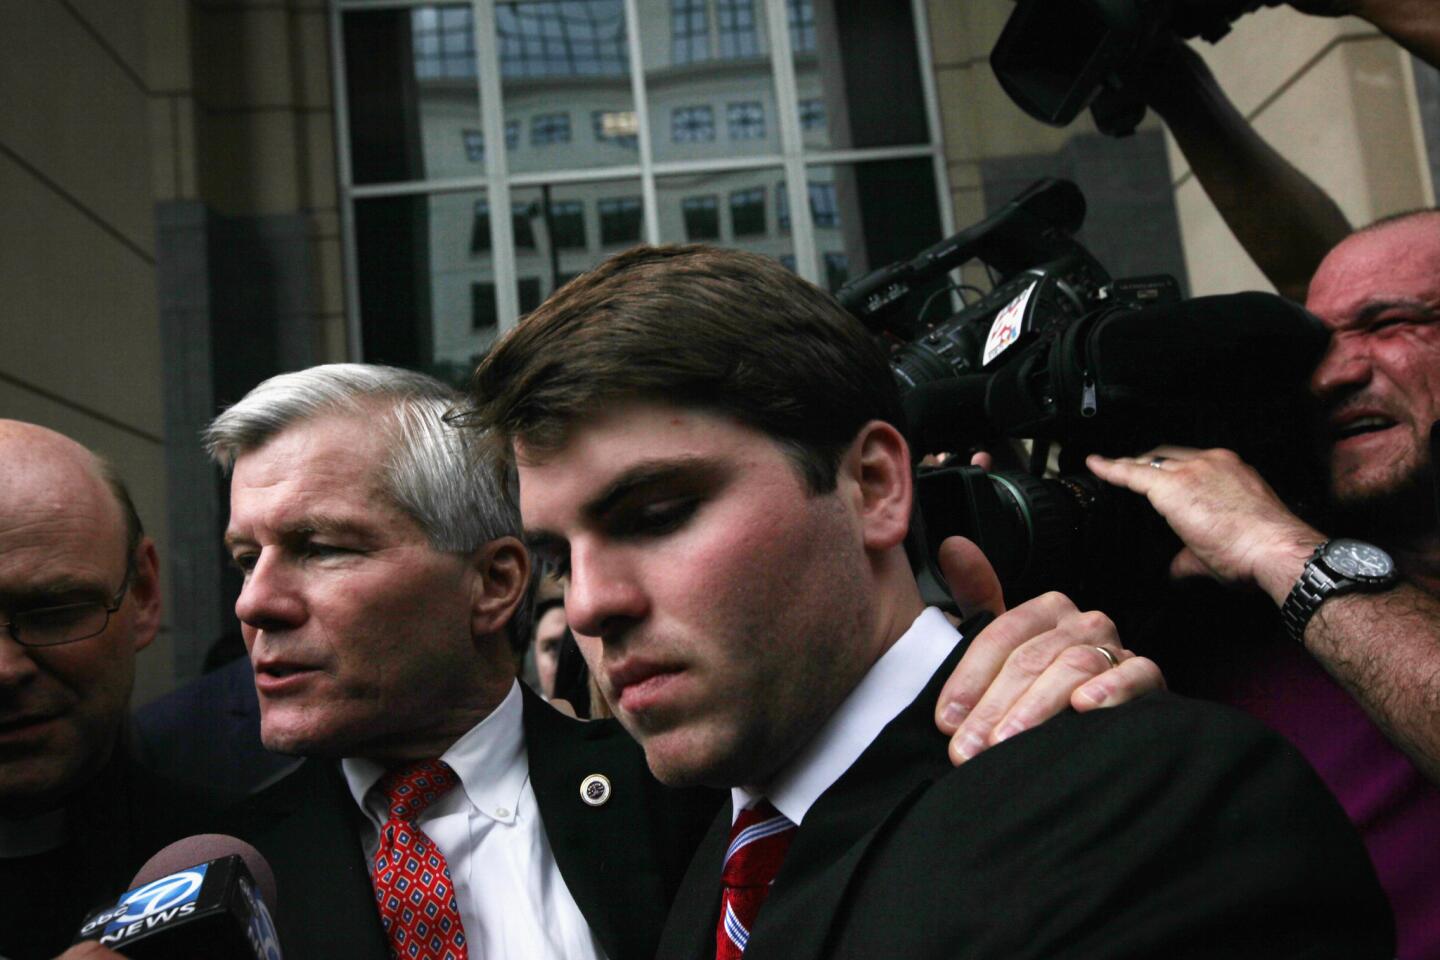 Verdict Reached In Corruption Trial Of Former Virginia Governor McDonnell And His Wife